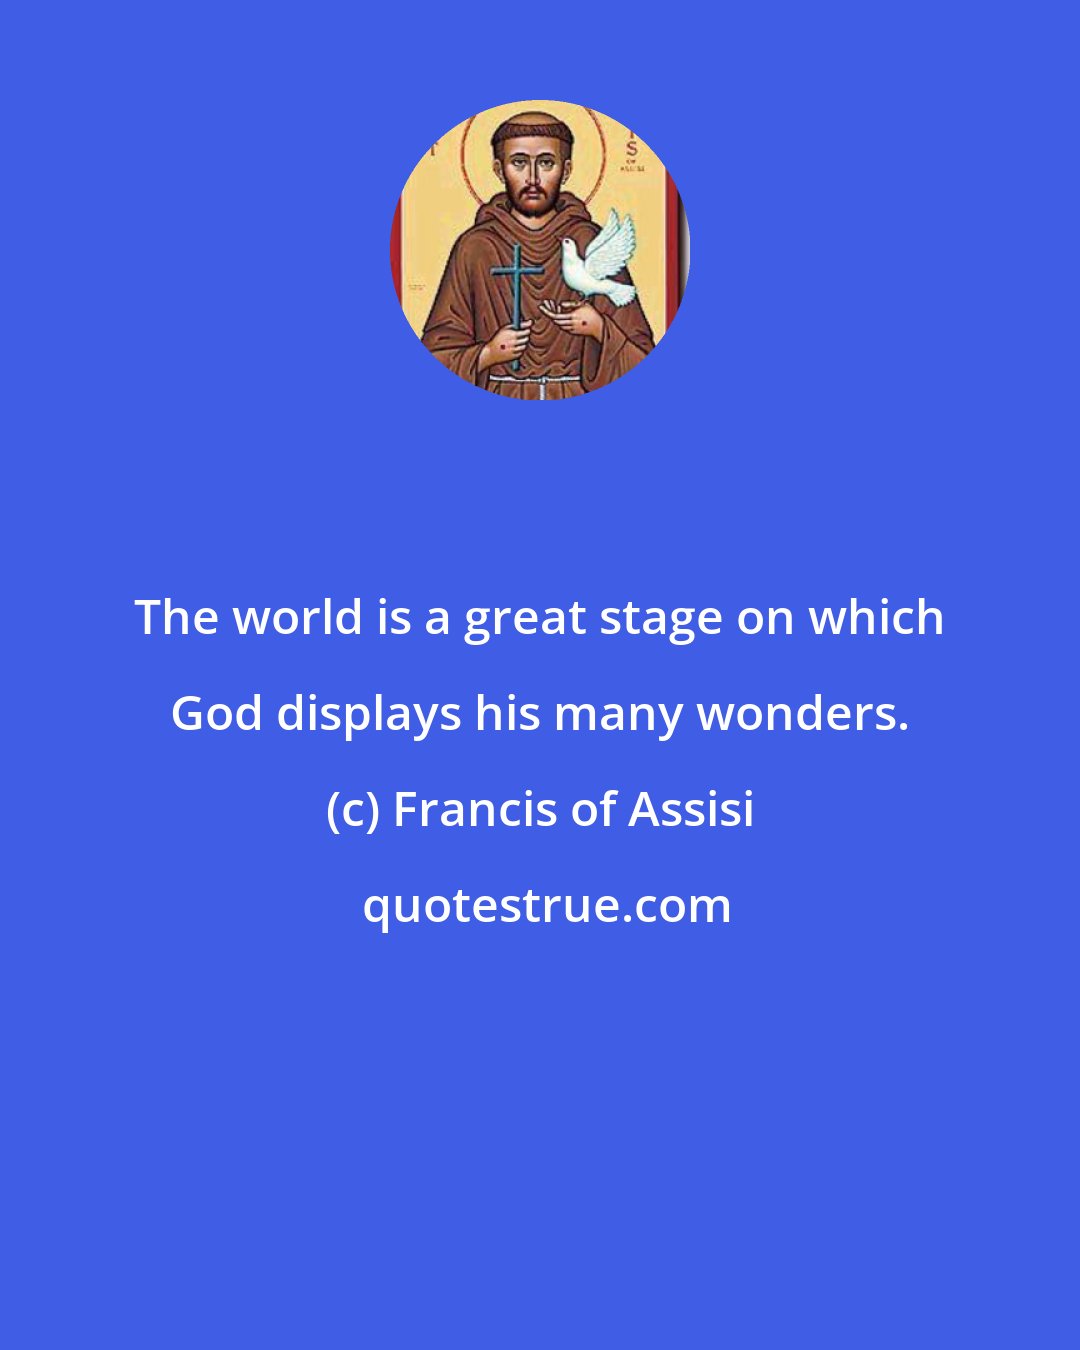 Francis of Assisi: The world is a great stage on which God displays his many wonders.